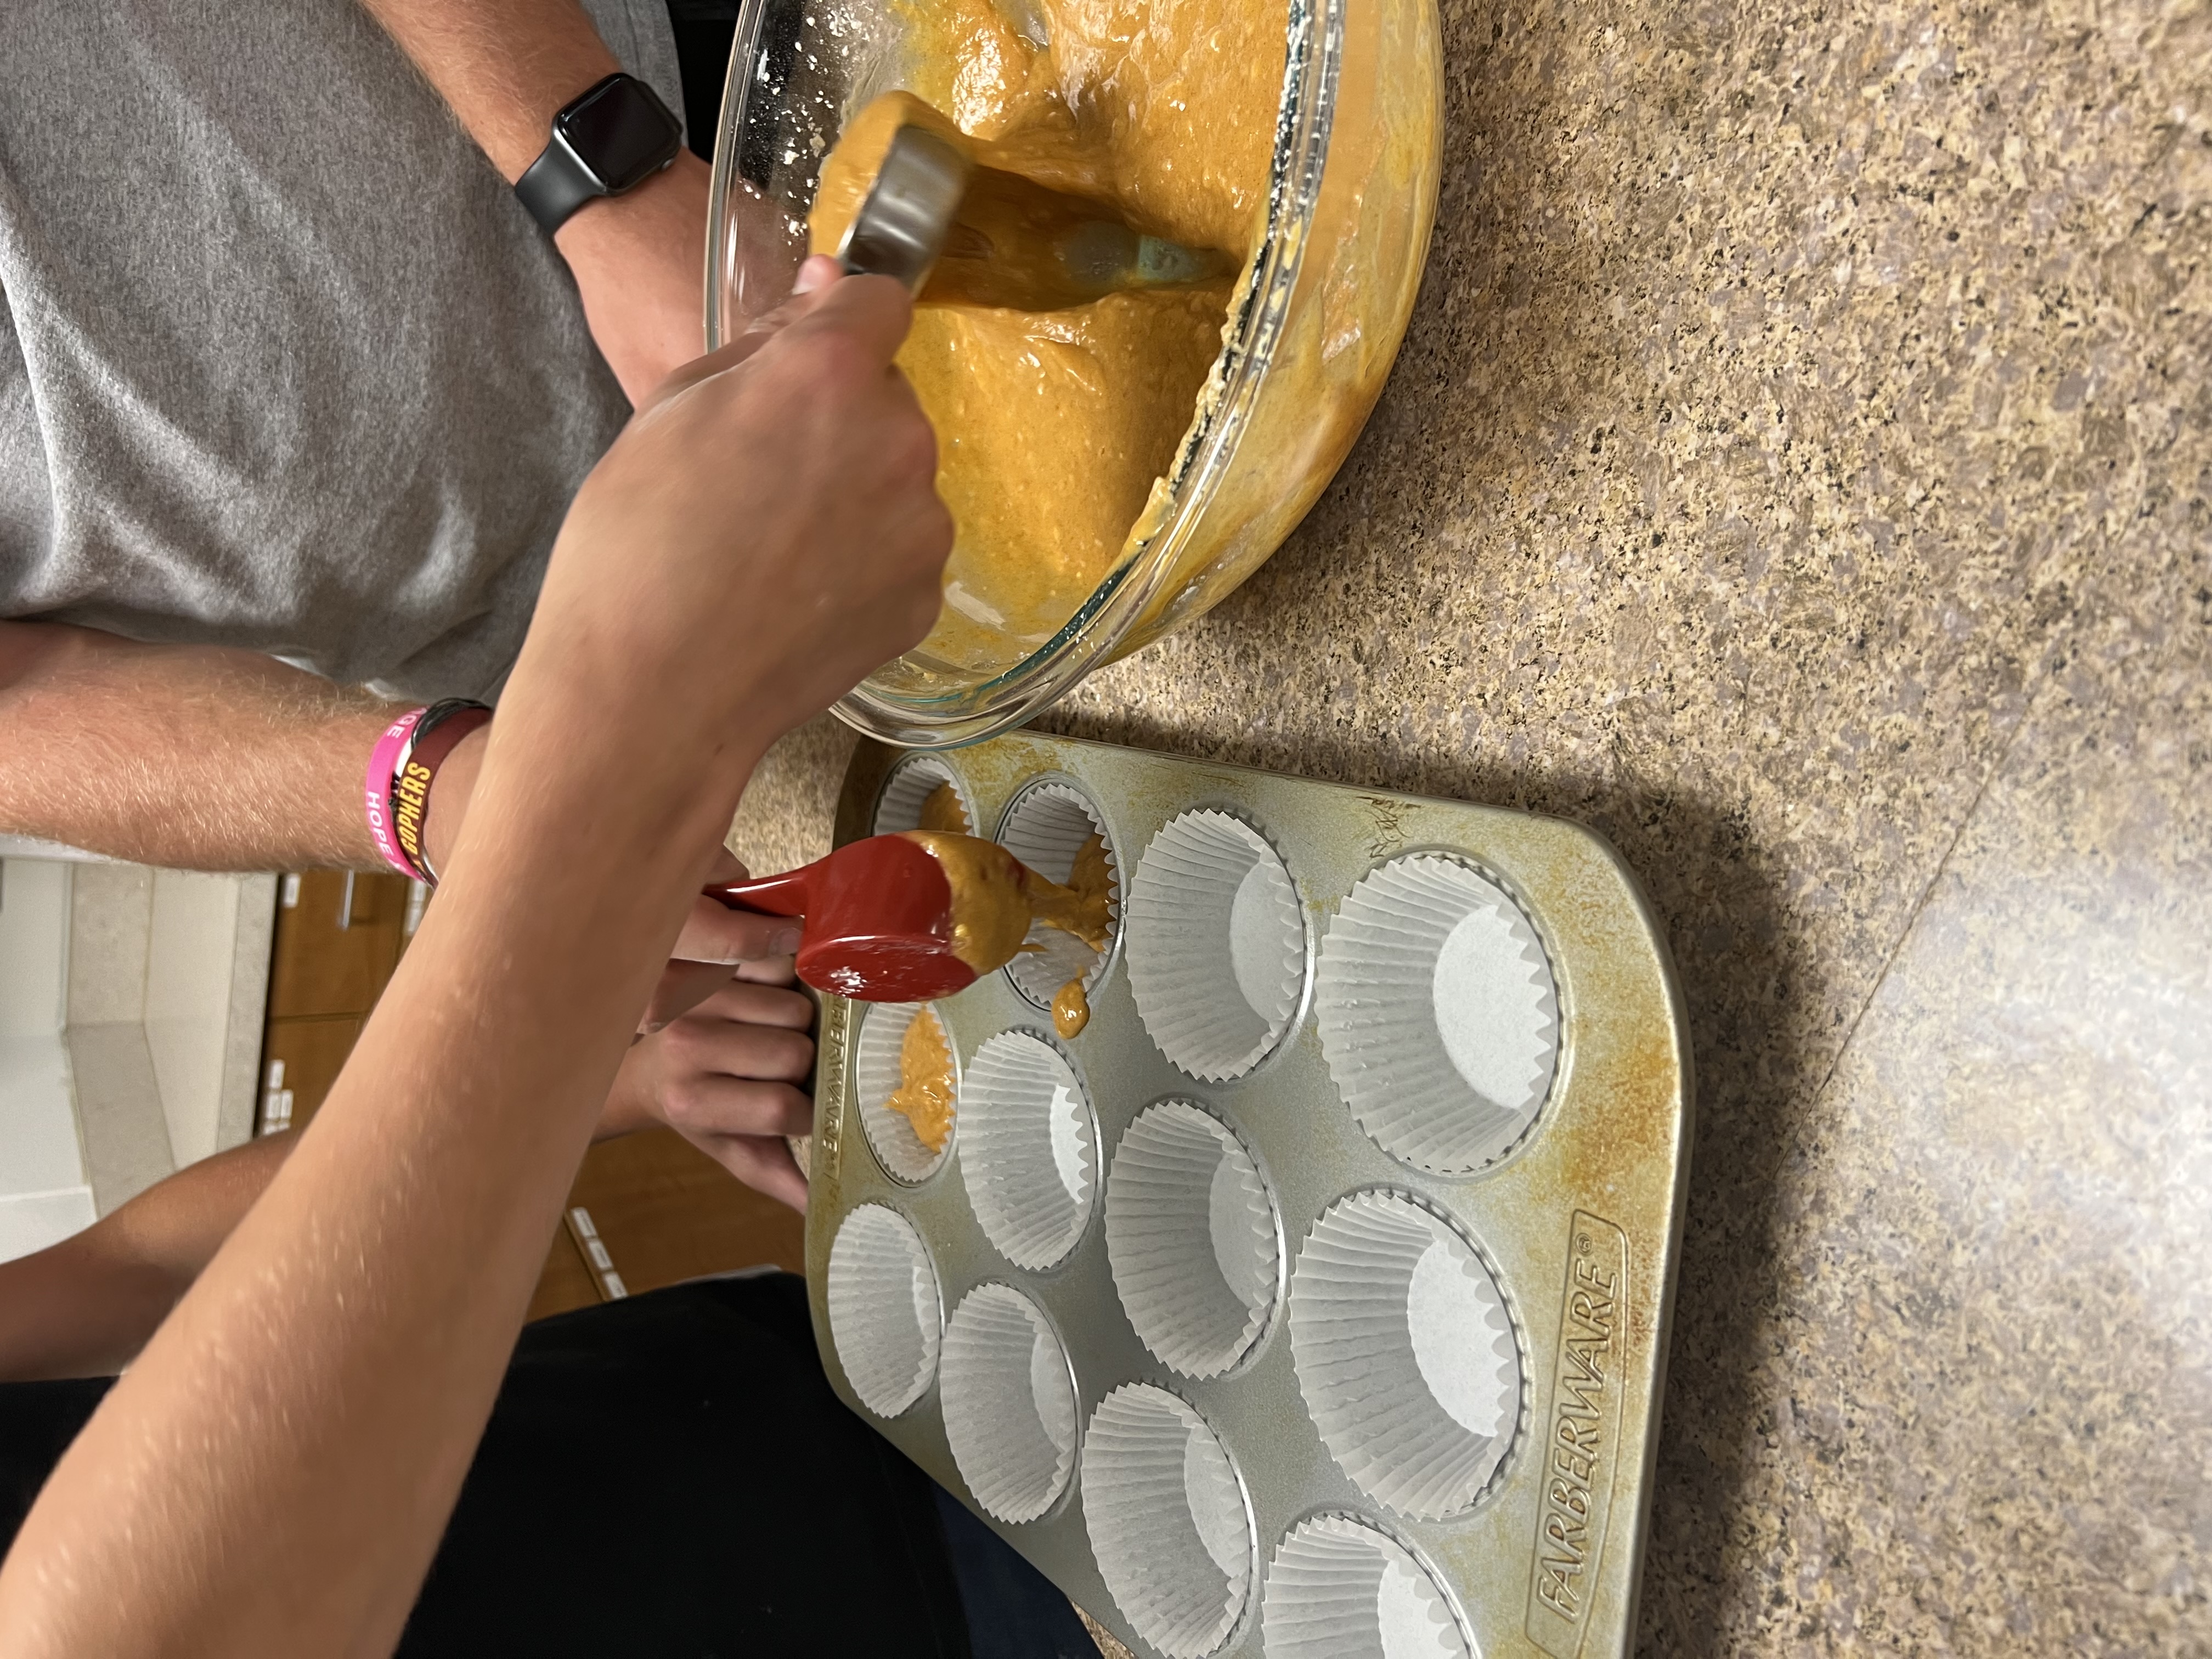 Two students use measuring cups to fill empty muffin tins with batter.